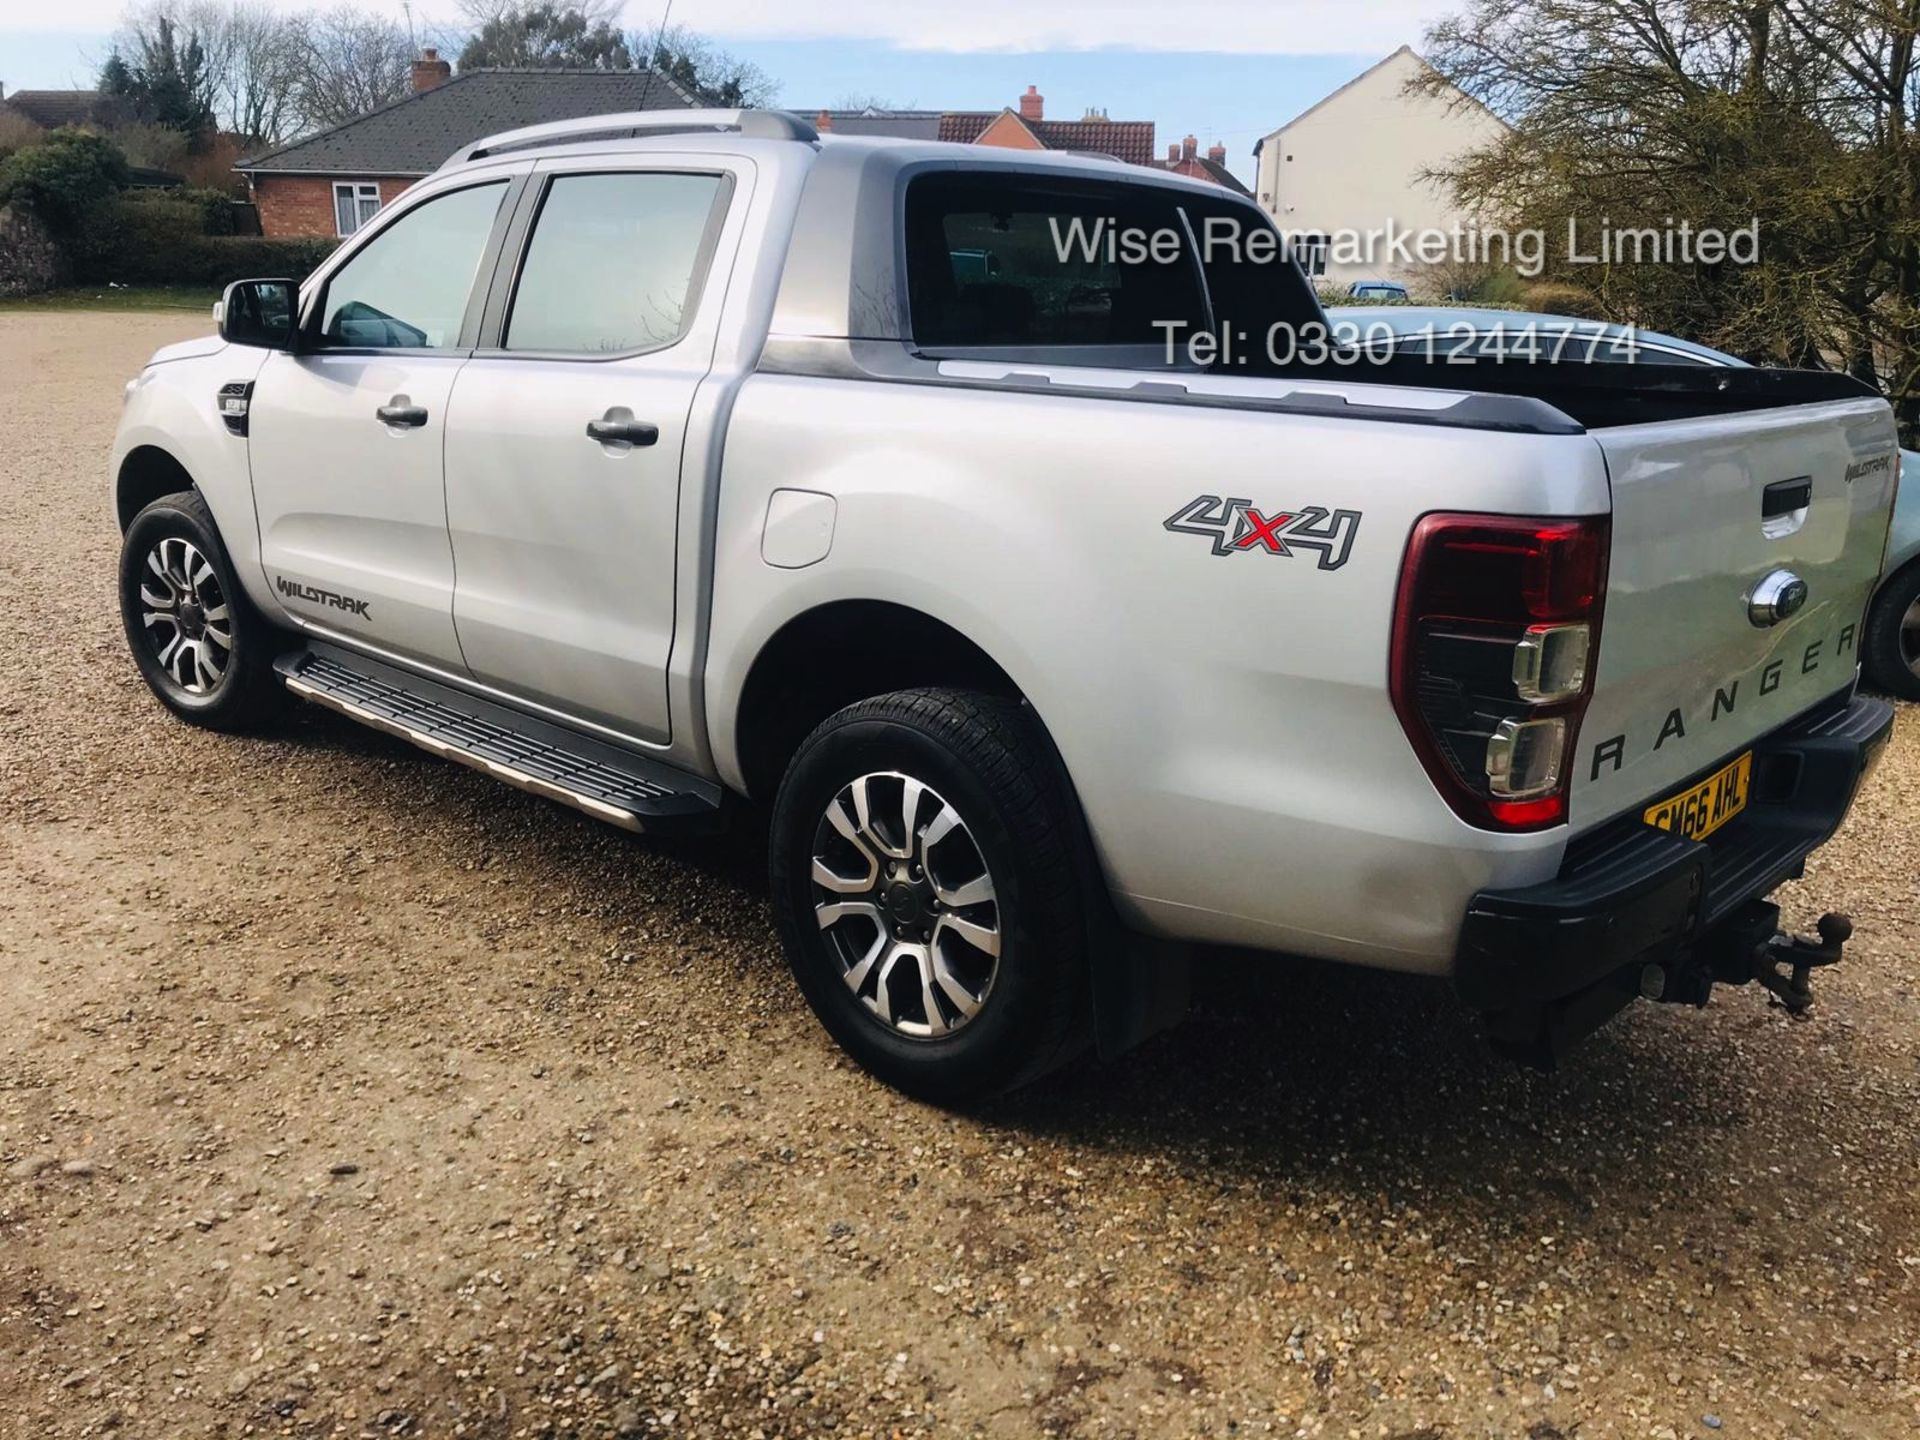 Ford Ranger 3.2 TDCI WILDTRAK - Auto - 2017 Model - 1 Former Keeper - 4x4 - TOP OF THE RANGE - Image 6 of 16